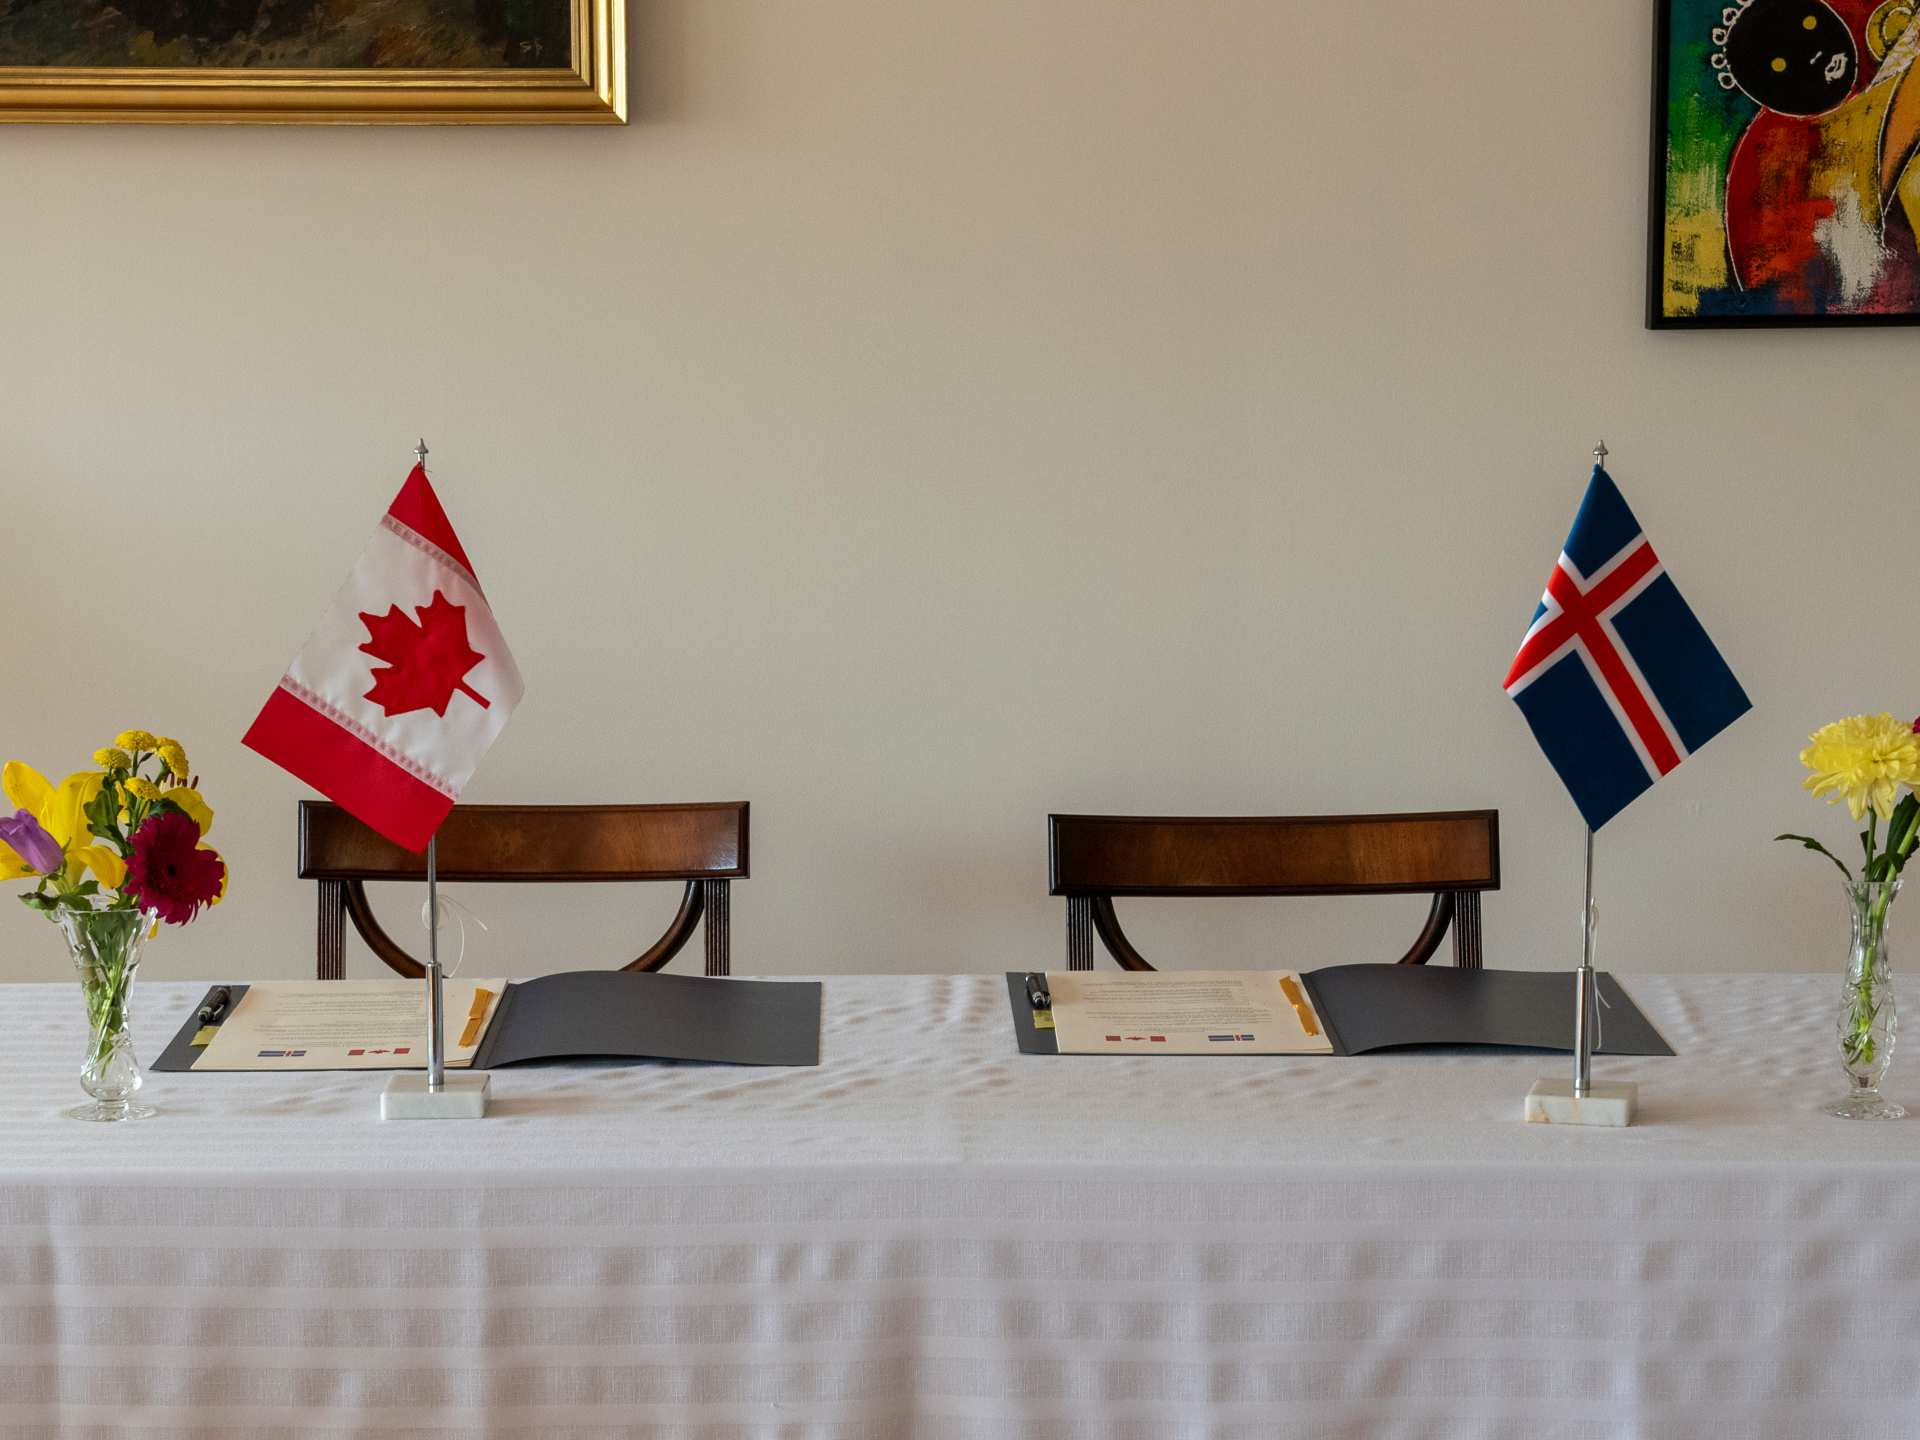 A white tablecloth table with a Canadian and Icelandic flag